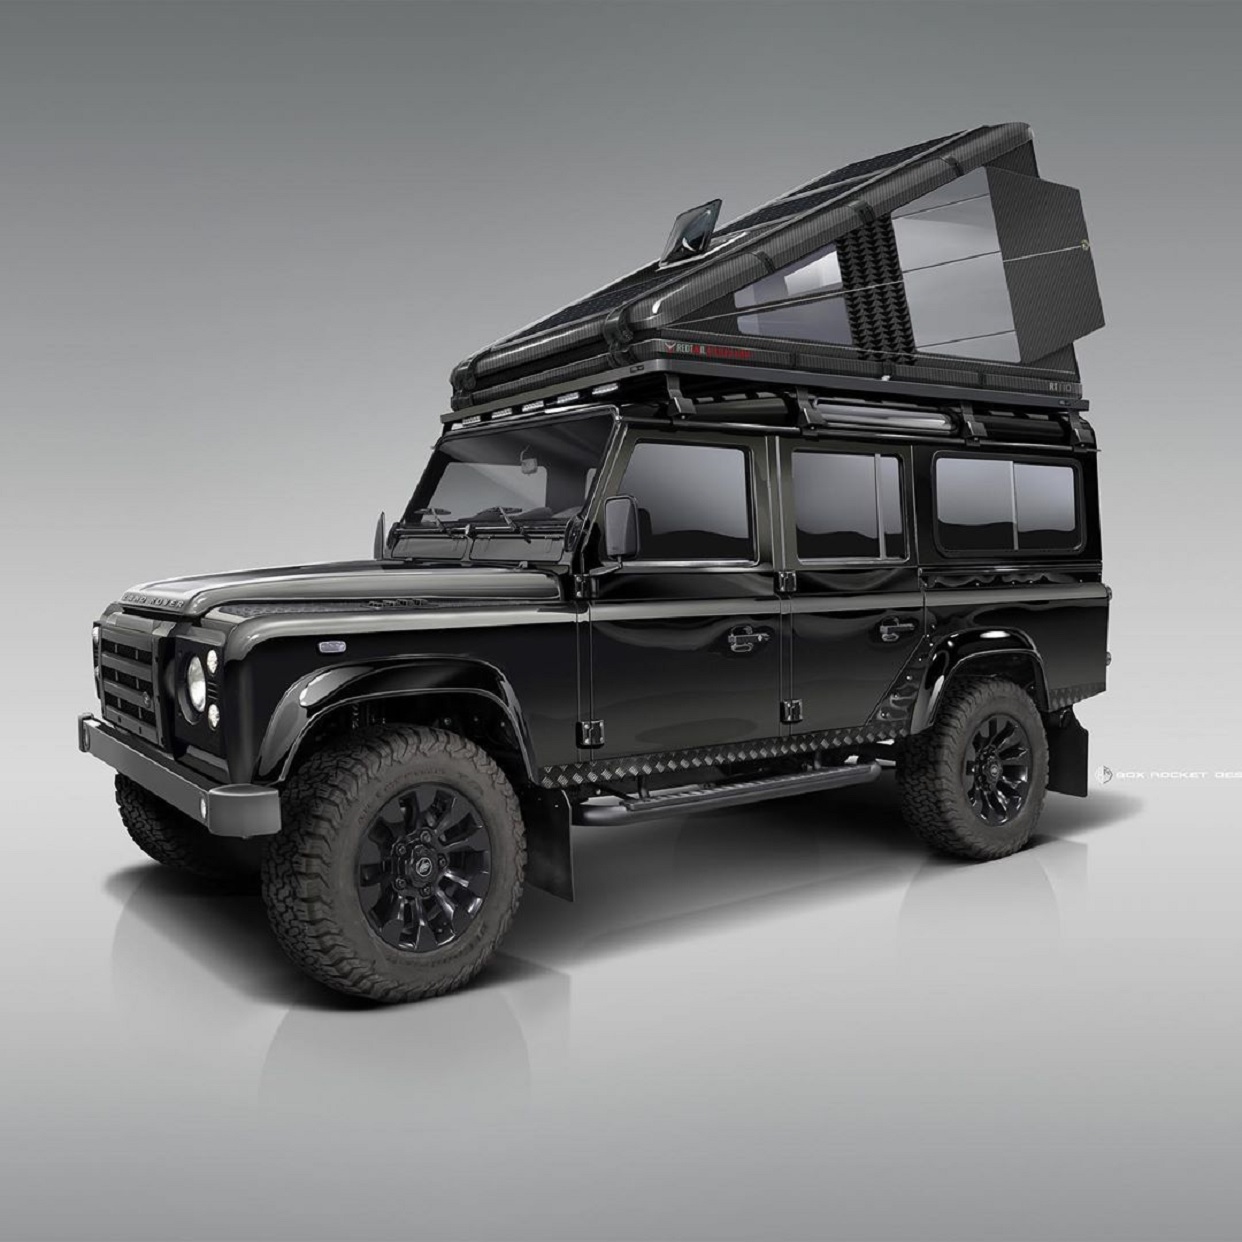 Black carbon-fiber RTC 110 roof tent mounted on black classic Land Rover Defender 110